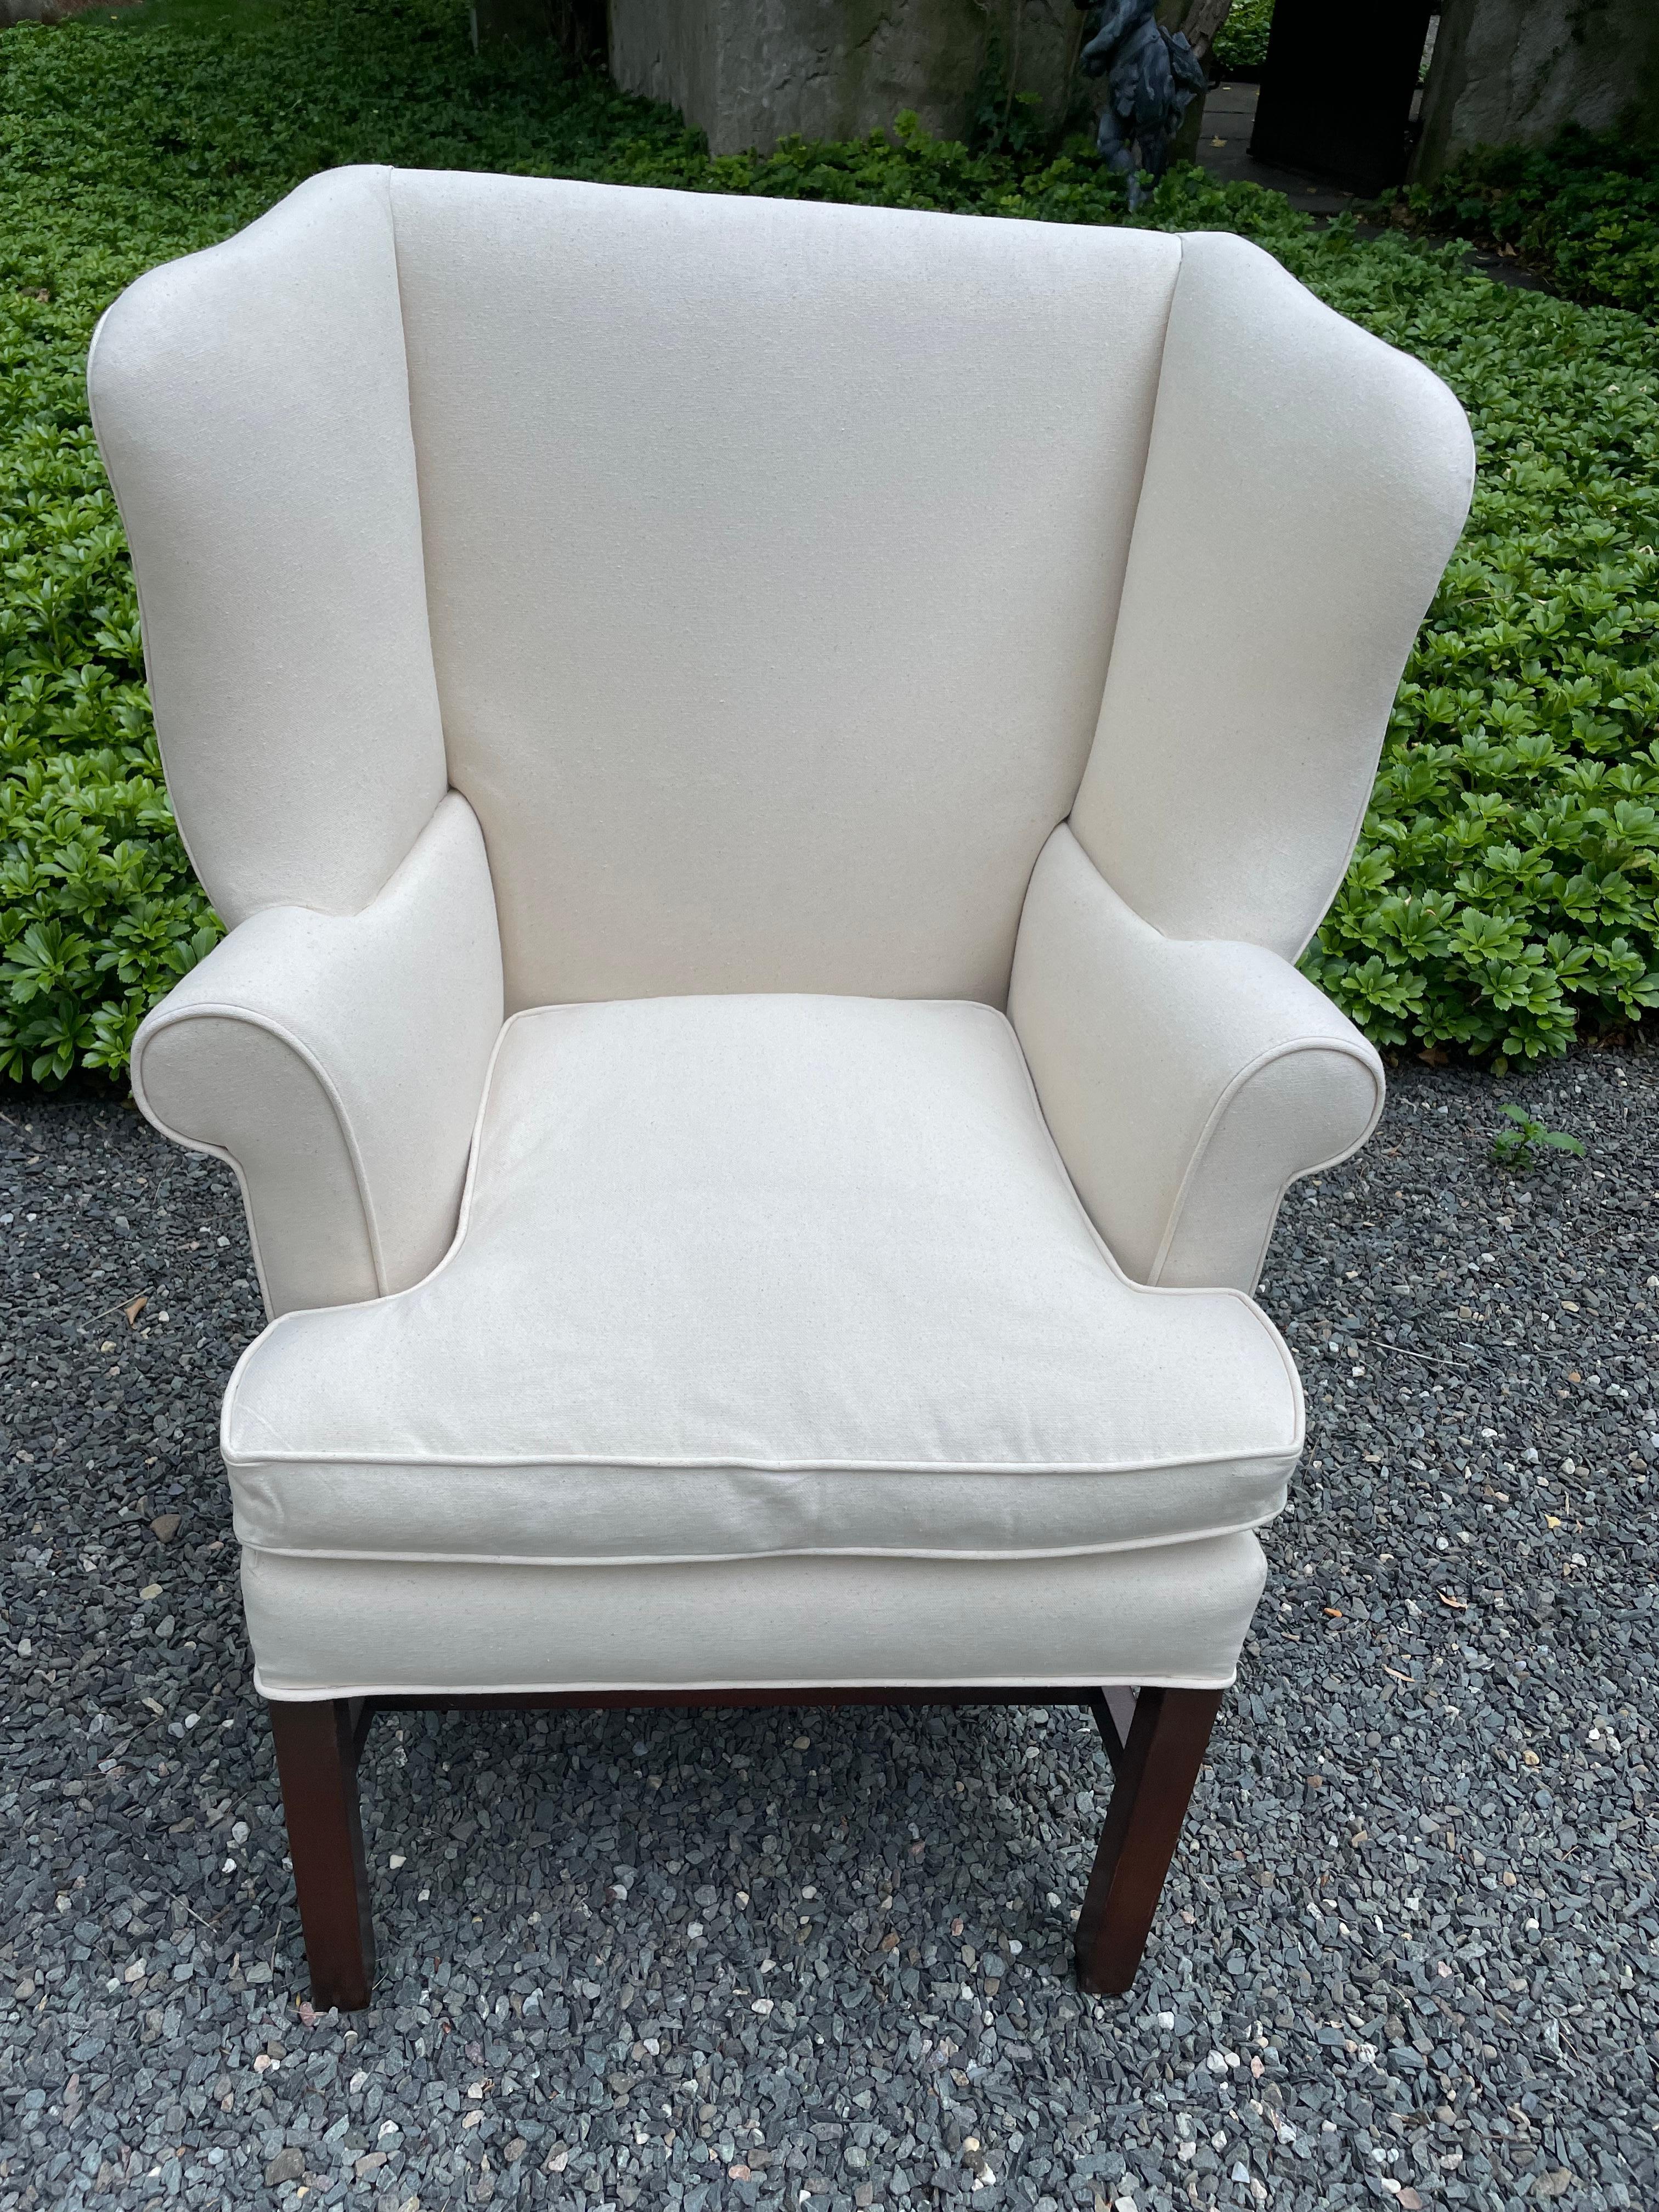 Classic Pair of Antique Georgian Style Newly Upholstered Wing Chairs (amerikanisch) im Angebot